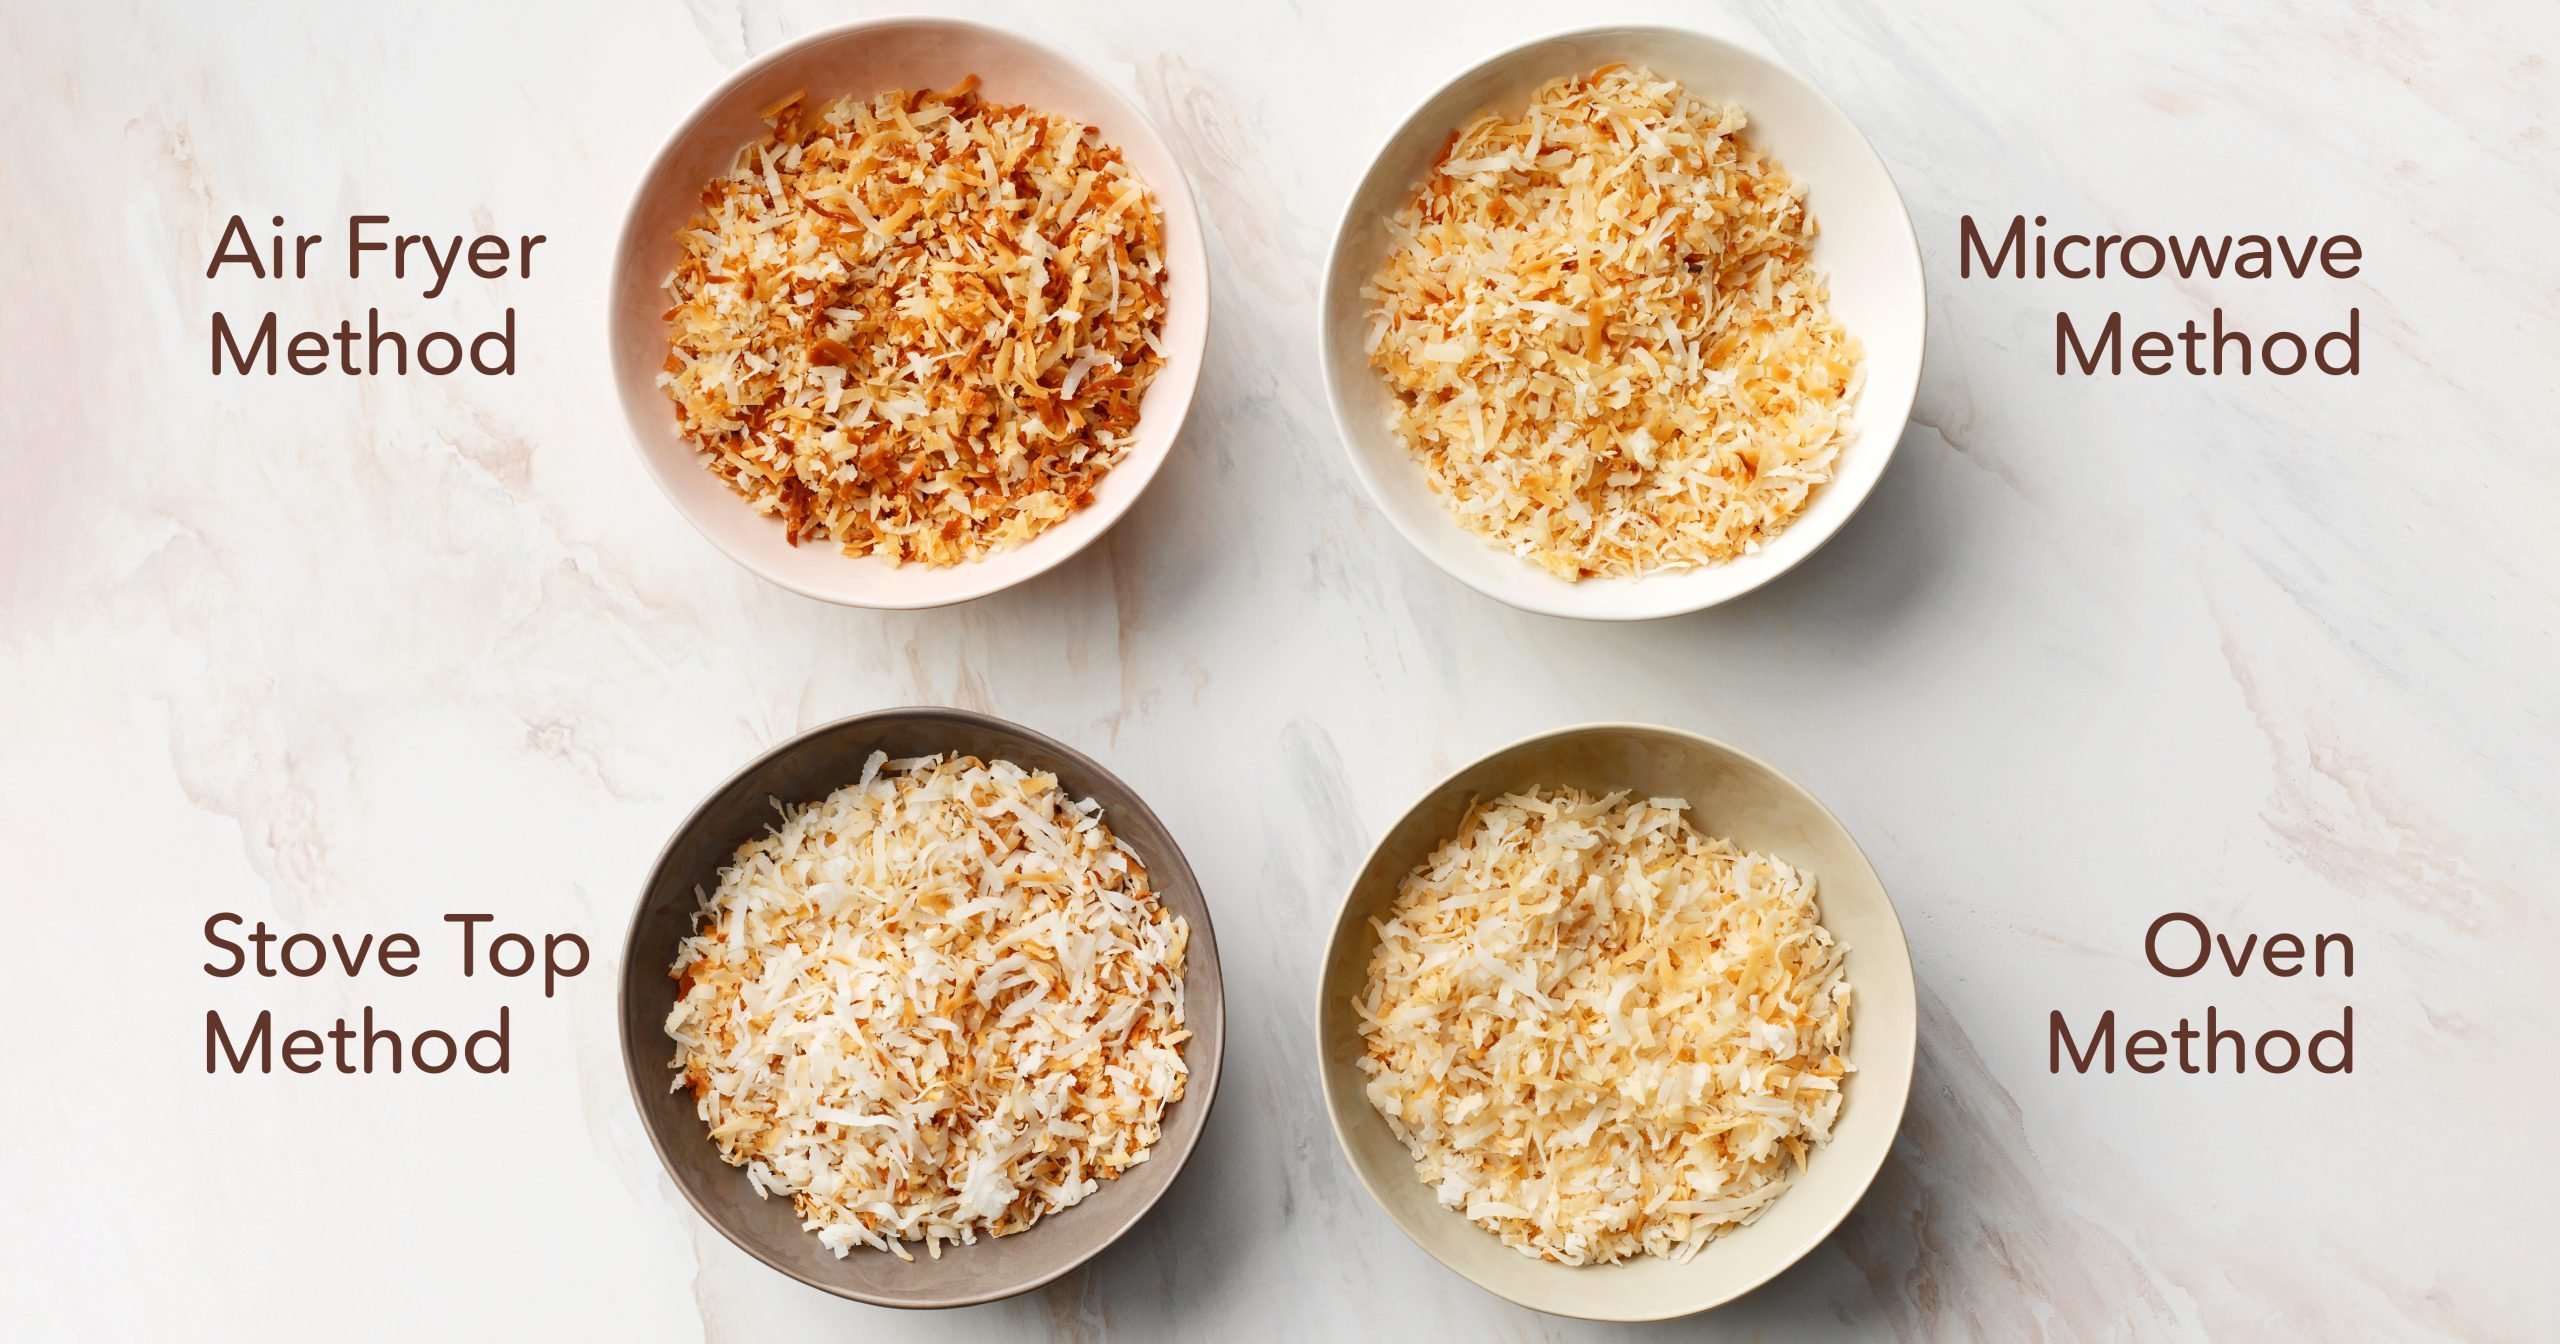 https://www.tasteofhome.com/wp-content/uploads/2020/01/toasted-coconut-methods-labeled-2-S-scaled.jpg